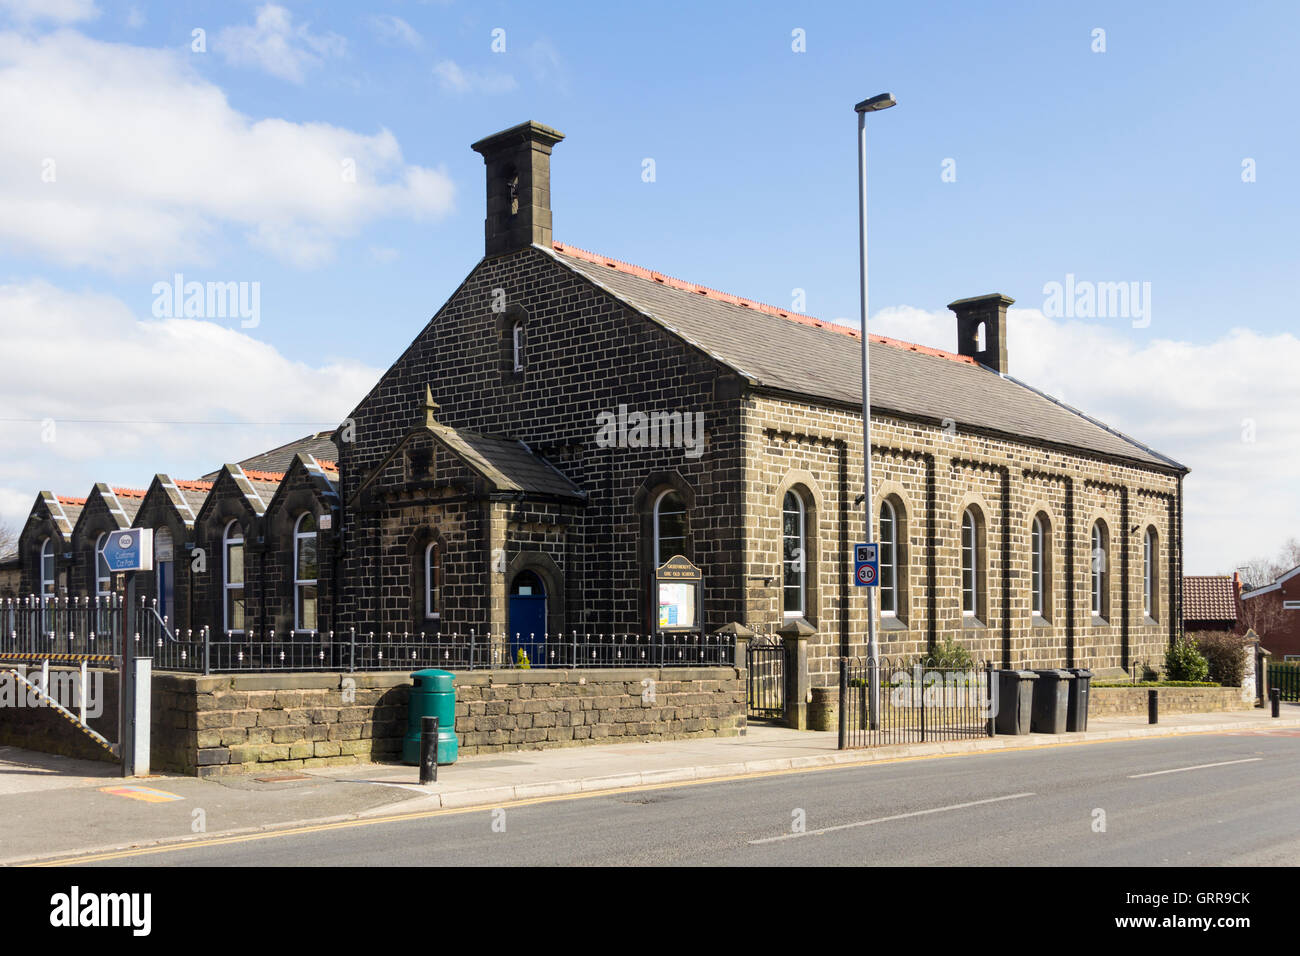 Greenmount URC Old School, dating from 1848.The Old School is now used extensively for village community activities. Stock Photo